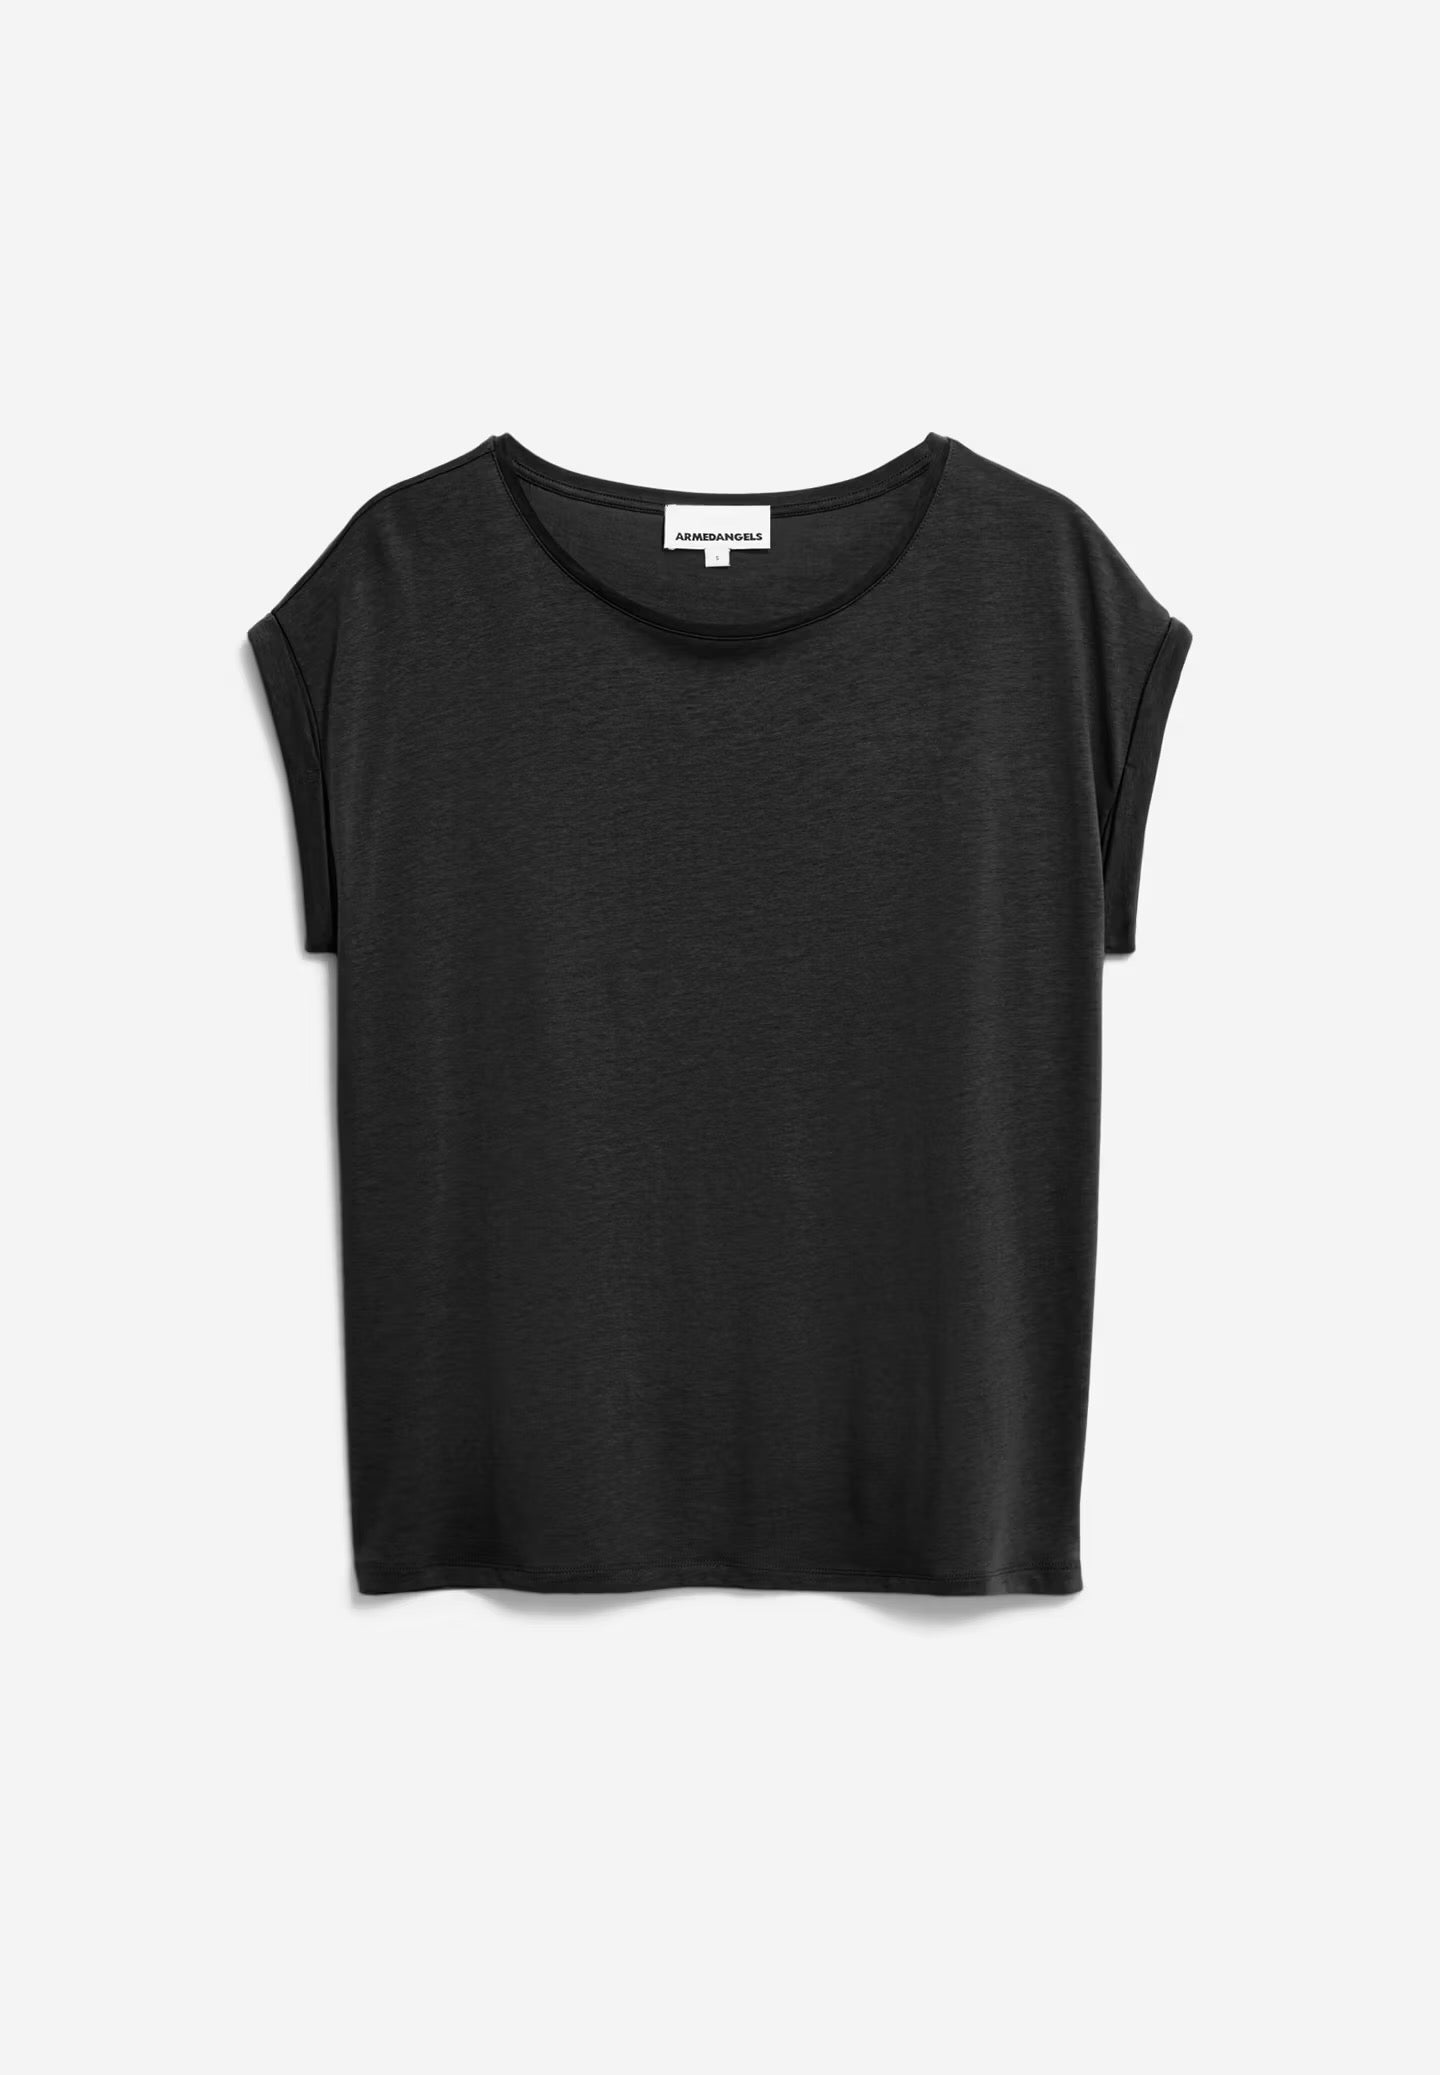 Relaxed fit cap sleeve t-shirt by ARMEDANGELS in black, made from a sustainable TENCEL™ and organic cotton mix.